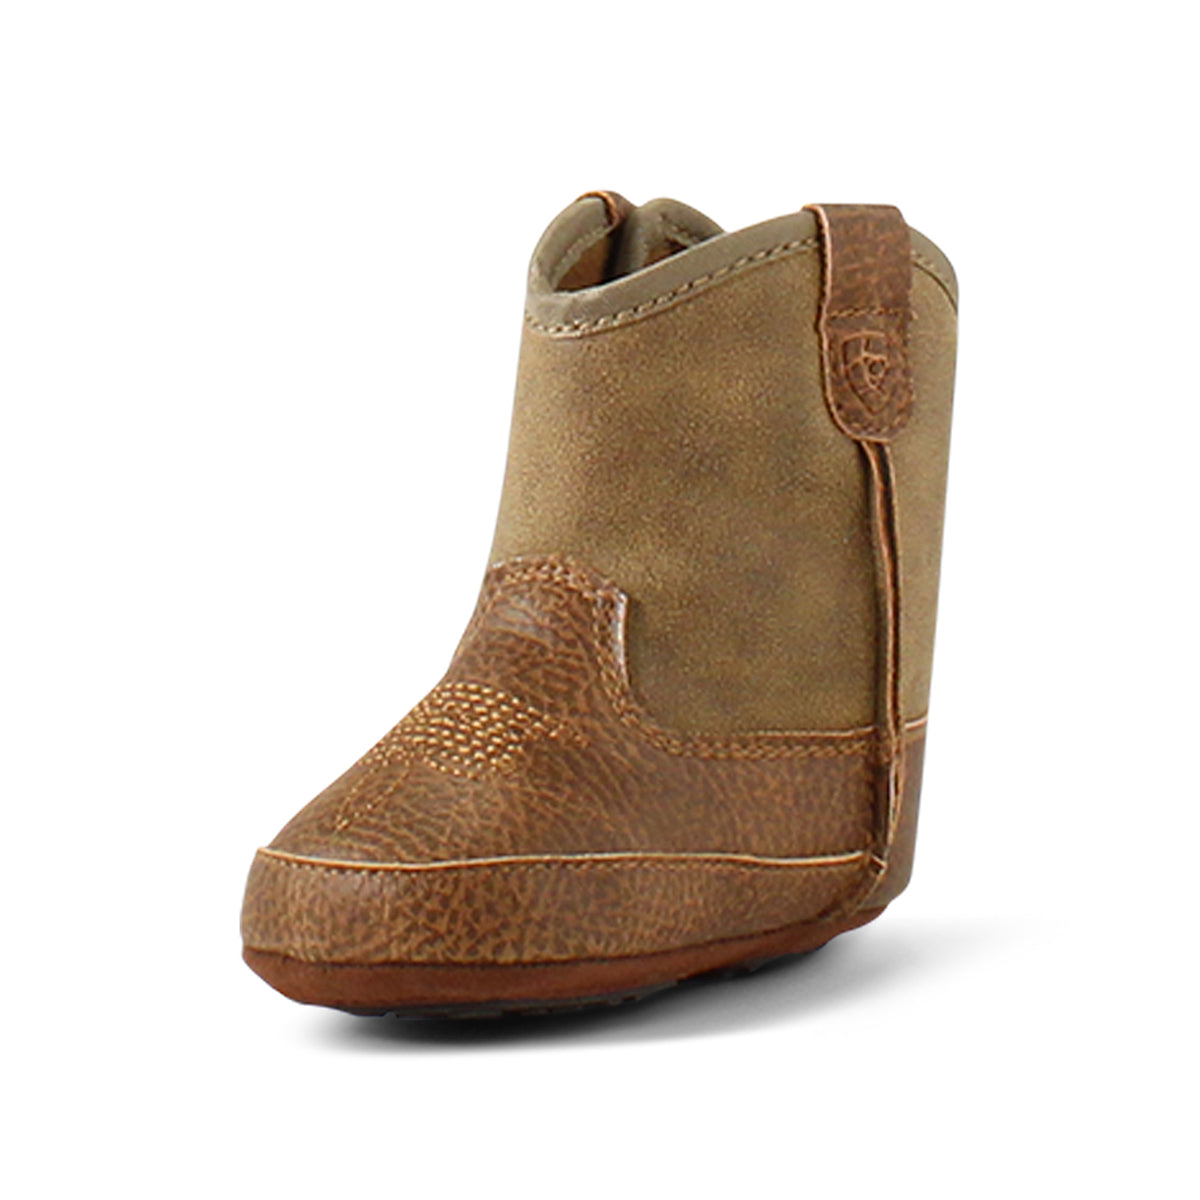 Ariat Infants "Rambler" Style Lil'Stomper Boots